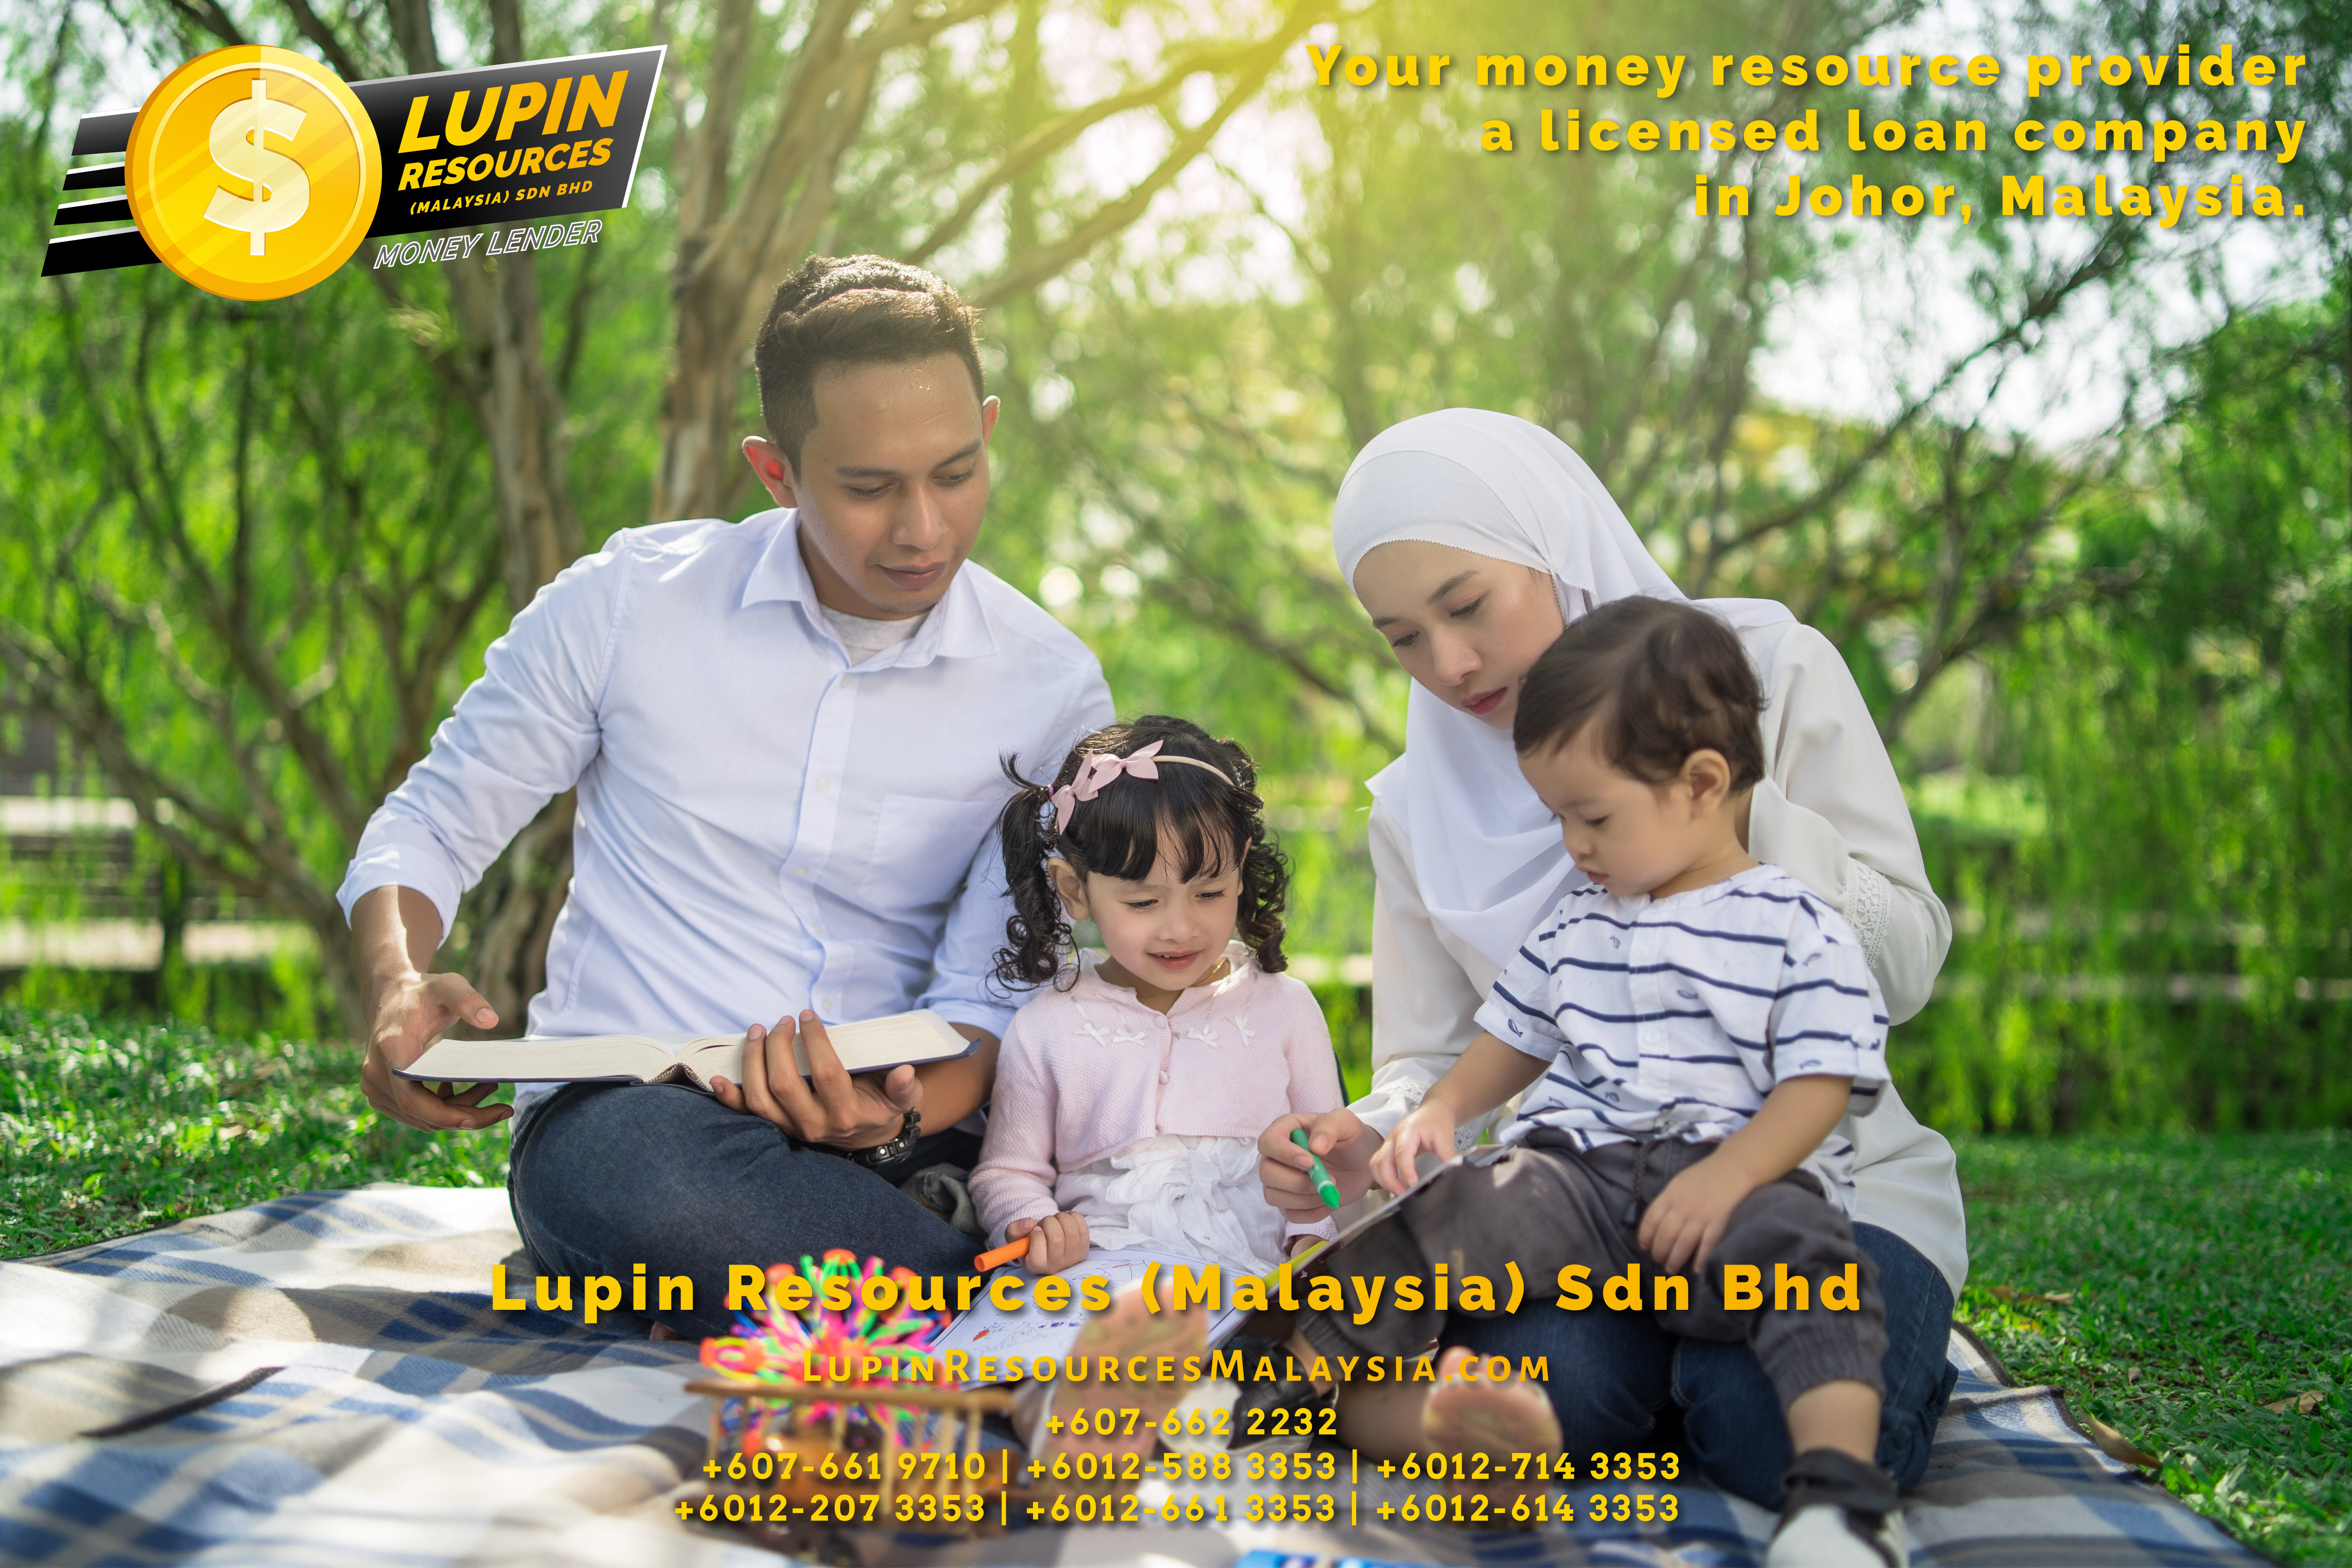 Johor Licensed Loan Company Licensed Money Lender Lupin Resources Malaysia SDN BHD Your money resource provider Kulai Johor Bahru Johor Malaysia Business Loan A01-68